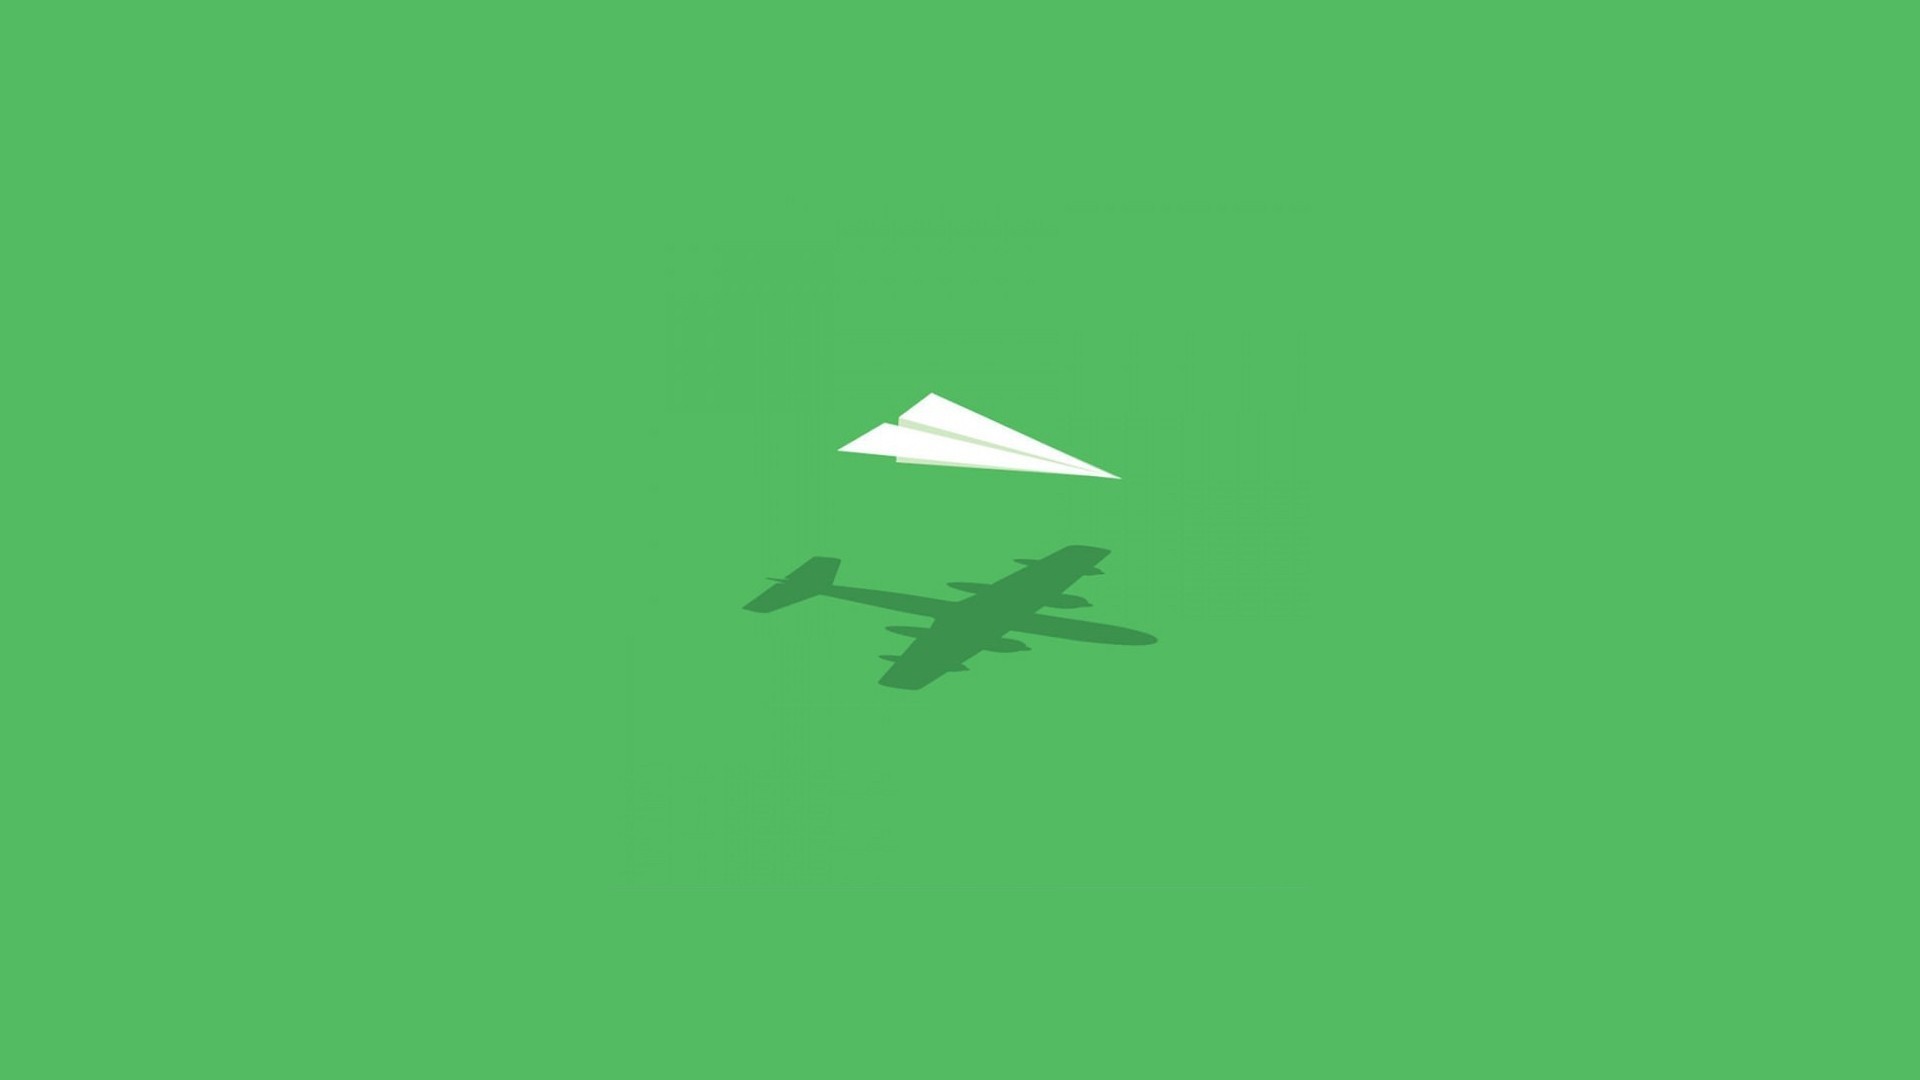 Airplane Silhouette And Paper Art Plane Minimal Hd - Minimalist Wallpaper Plane , HD Wallpaper & Backgrounds